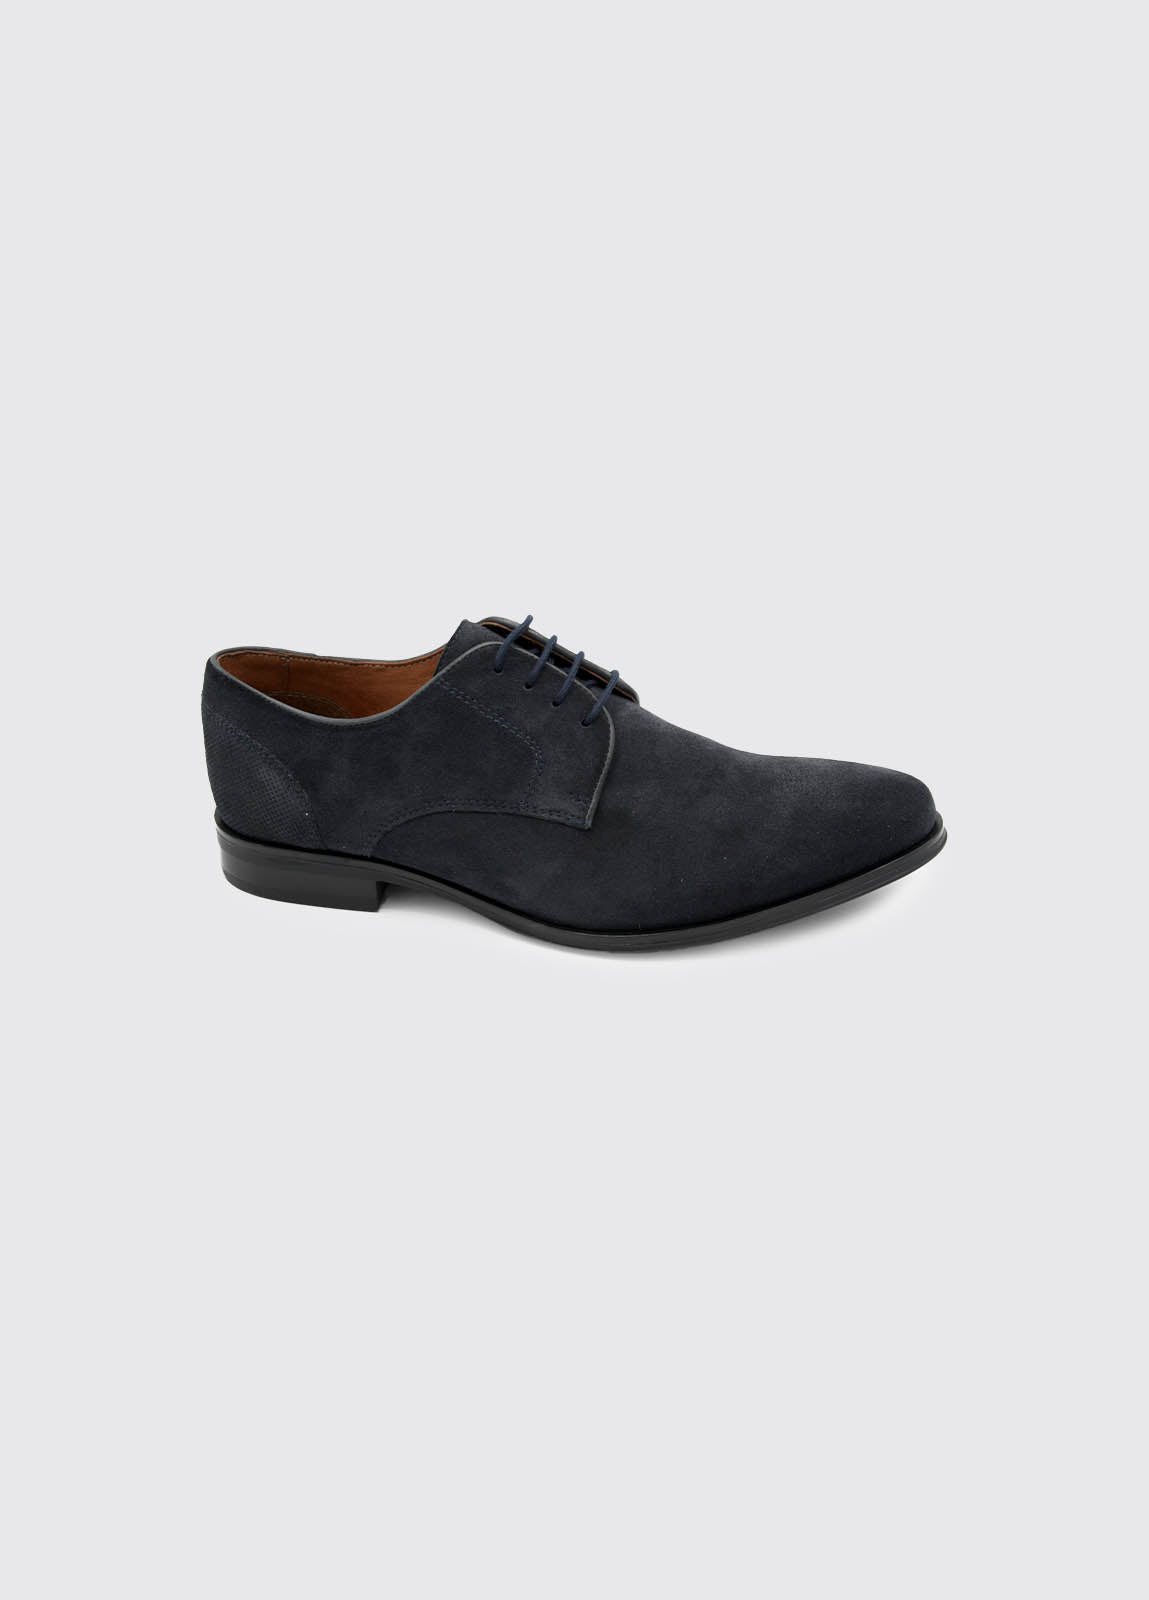 Sarge Navy Suede Shoe-Side view